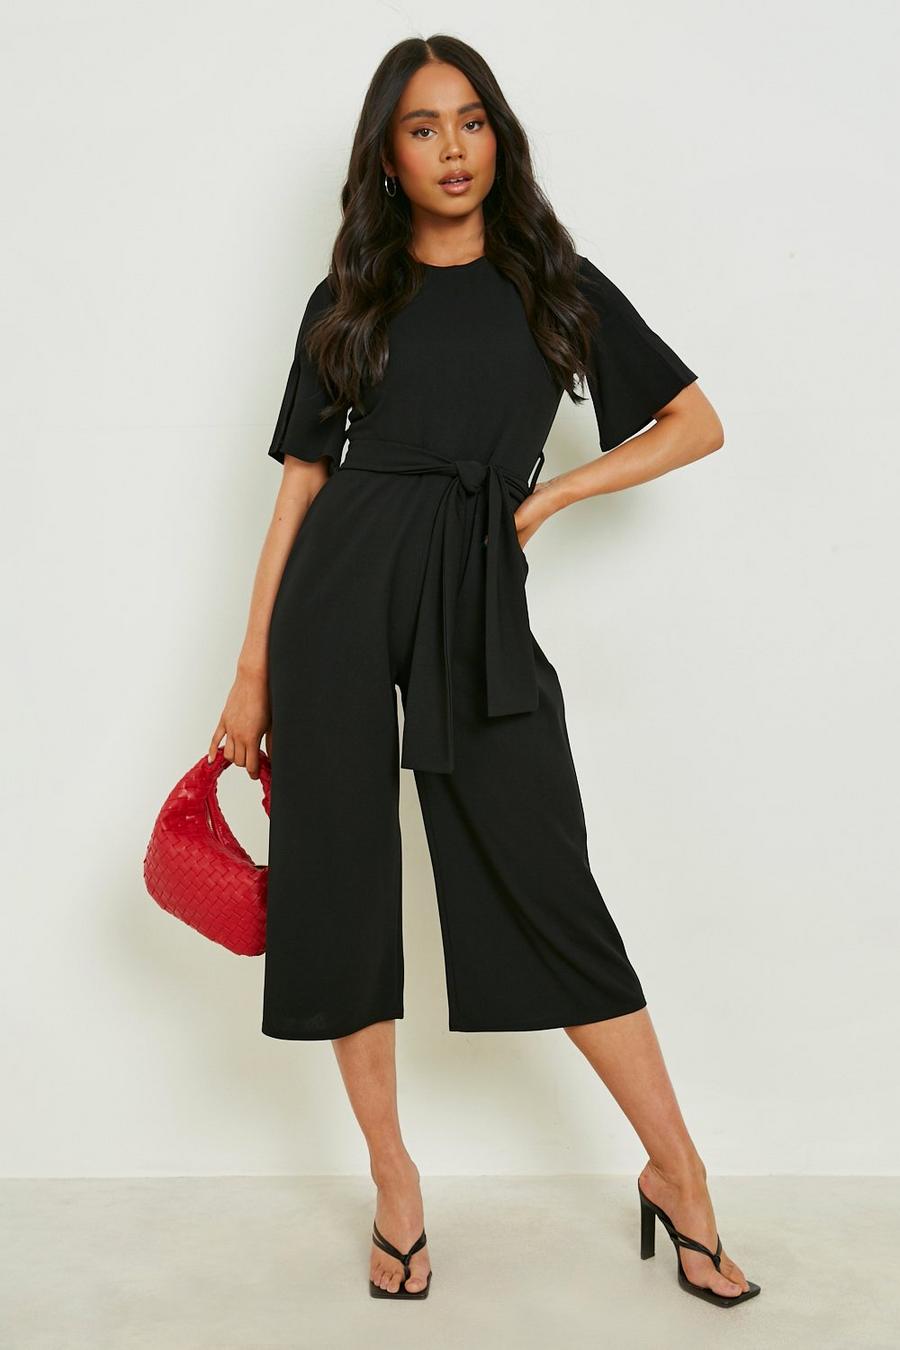 Boohoo Women Clothing Shorts Culottes Womens Petite Belted Culotte Jumpsuit 